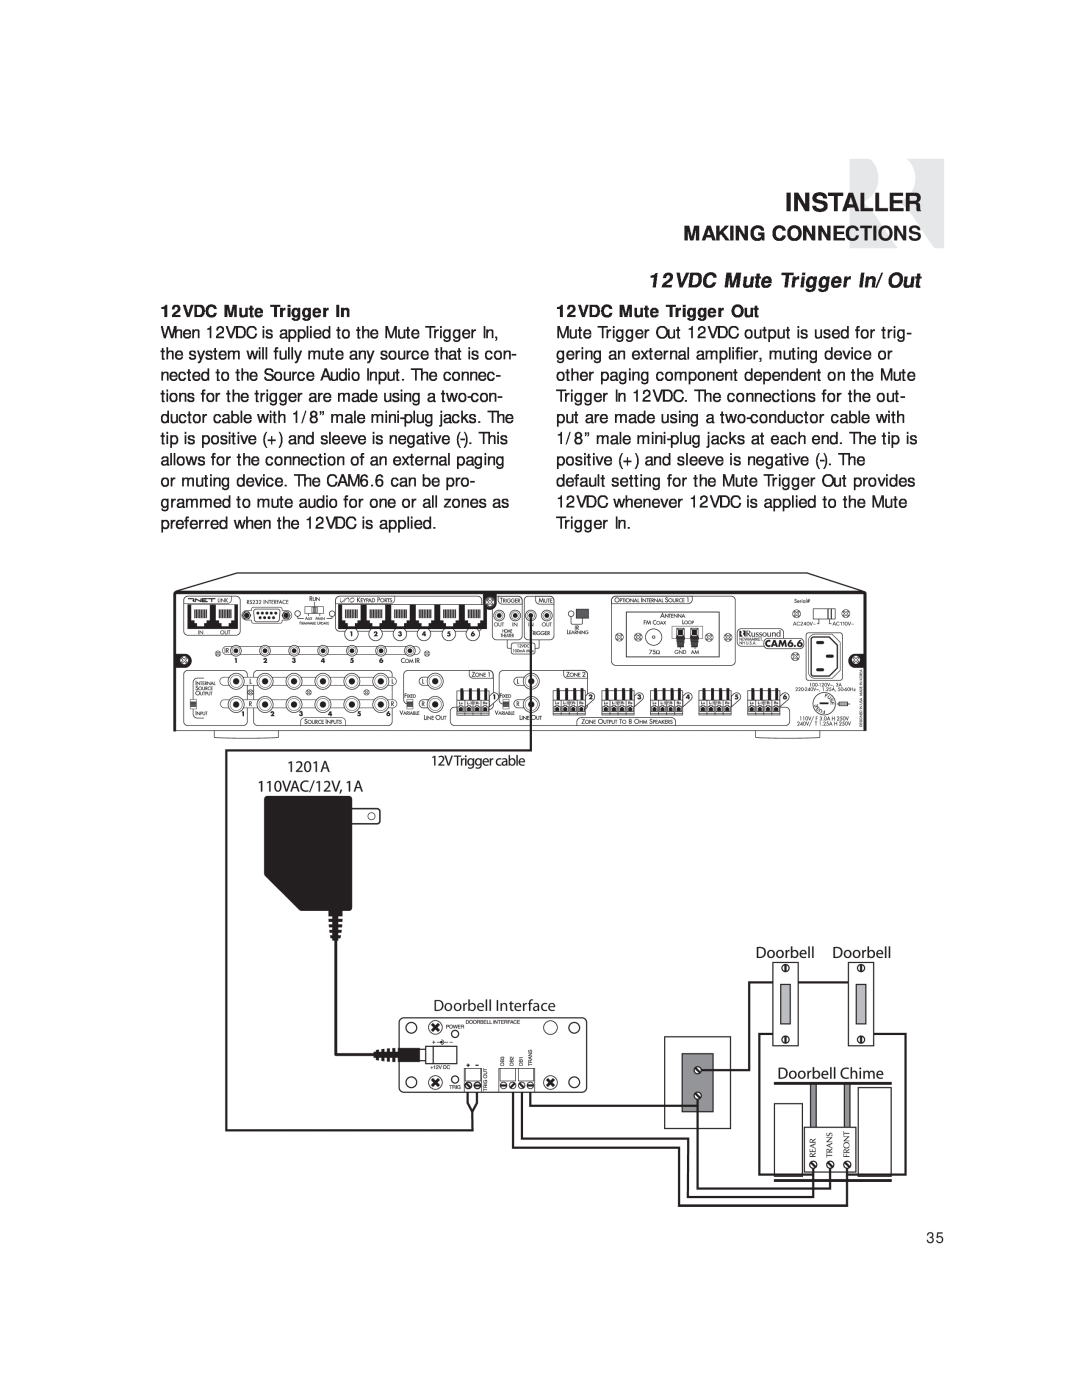 Russound CAM6.6T-S1 instruction manual 12VDC Mute Trigger In/Out, Installer, Making Connections, 12VDC Mute Trigger Out 